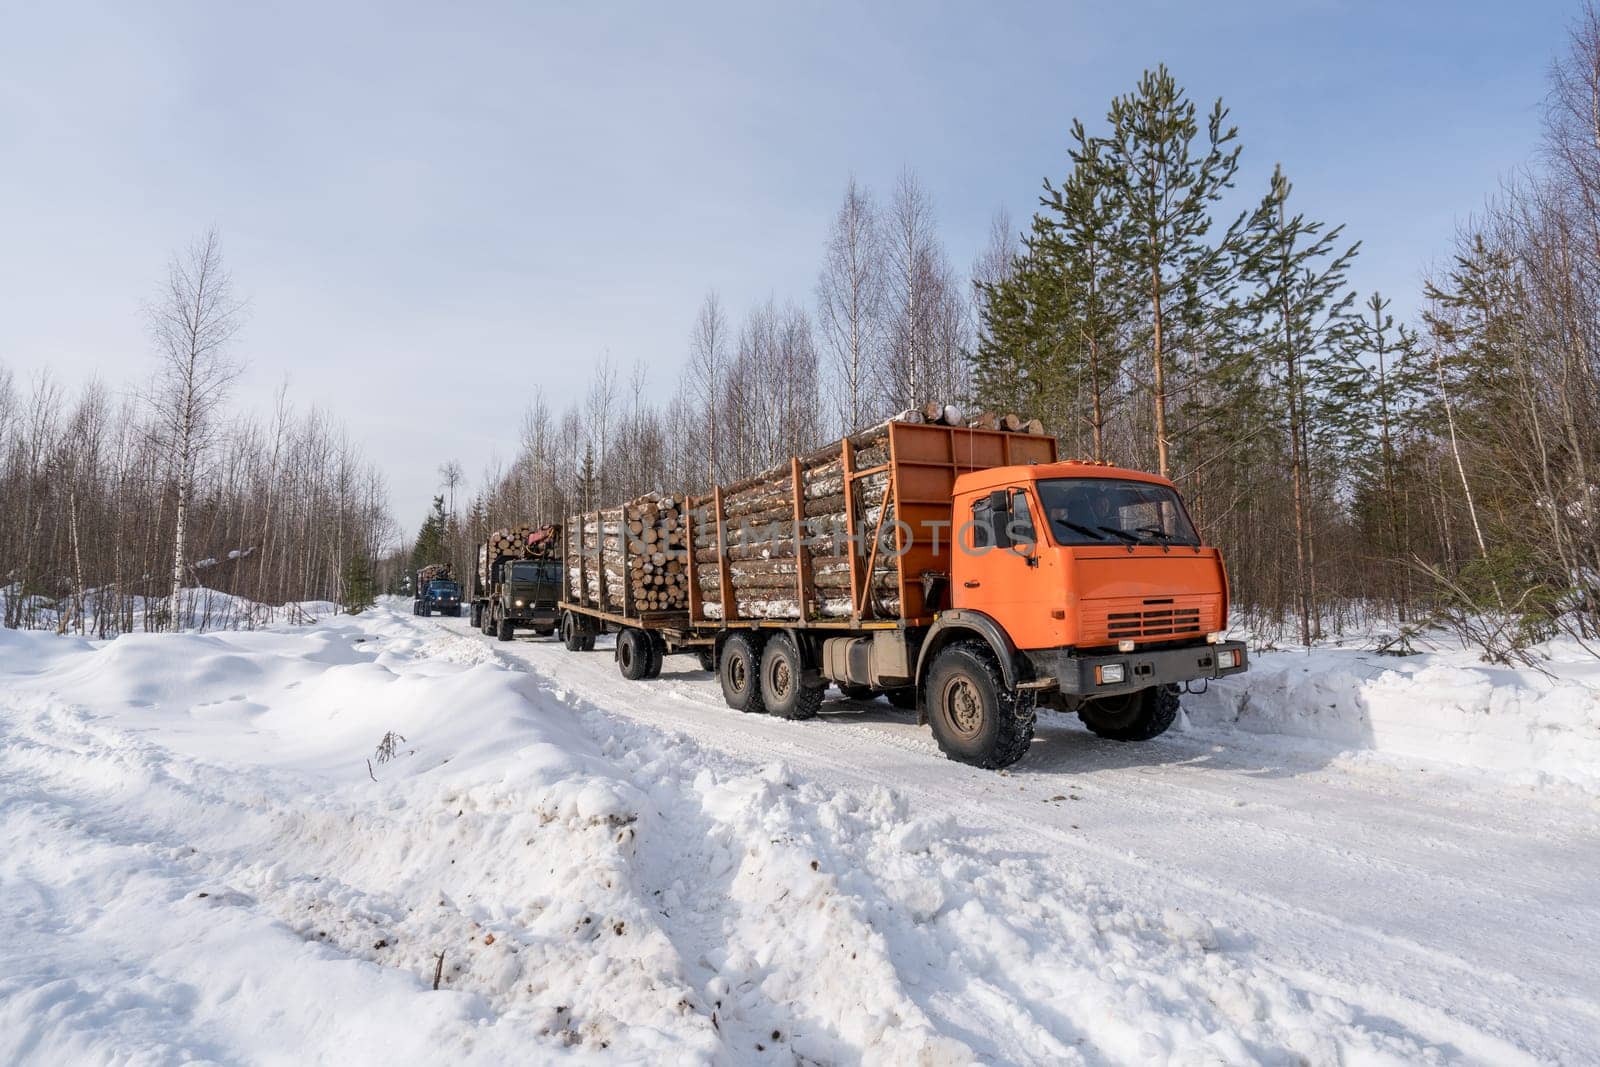 Trucks loaded with timber move out of woods in winter